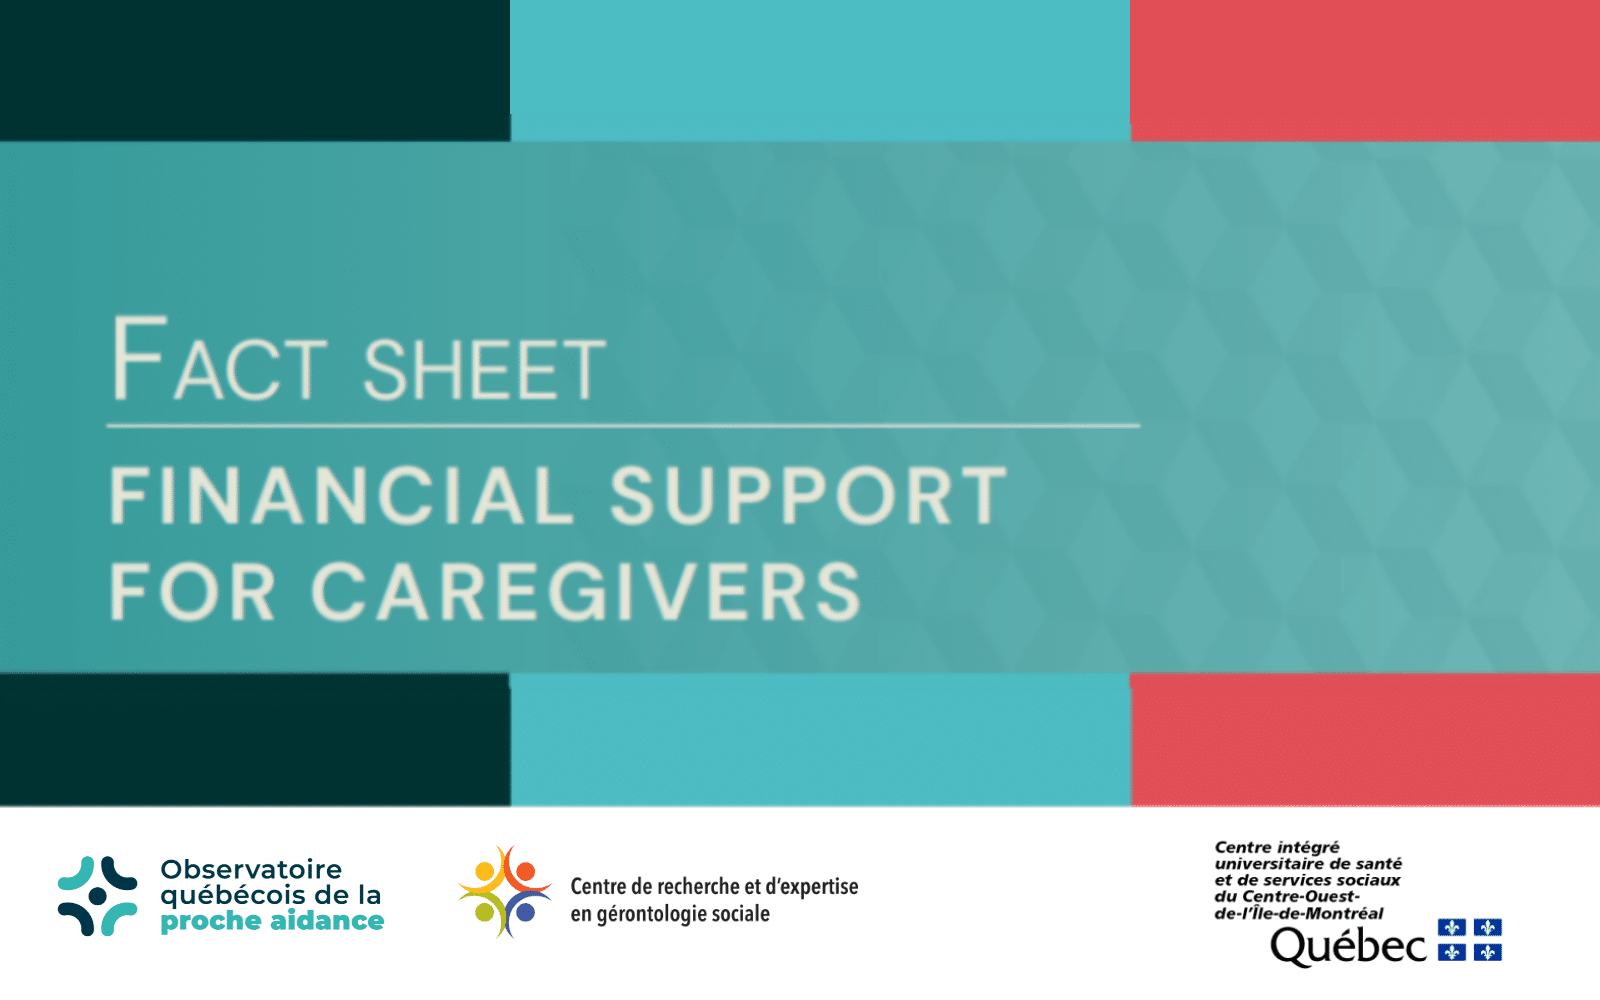 Now available in English: Financial Support for Caregivers Fact Sheet